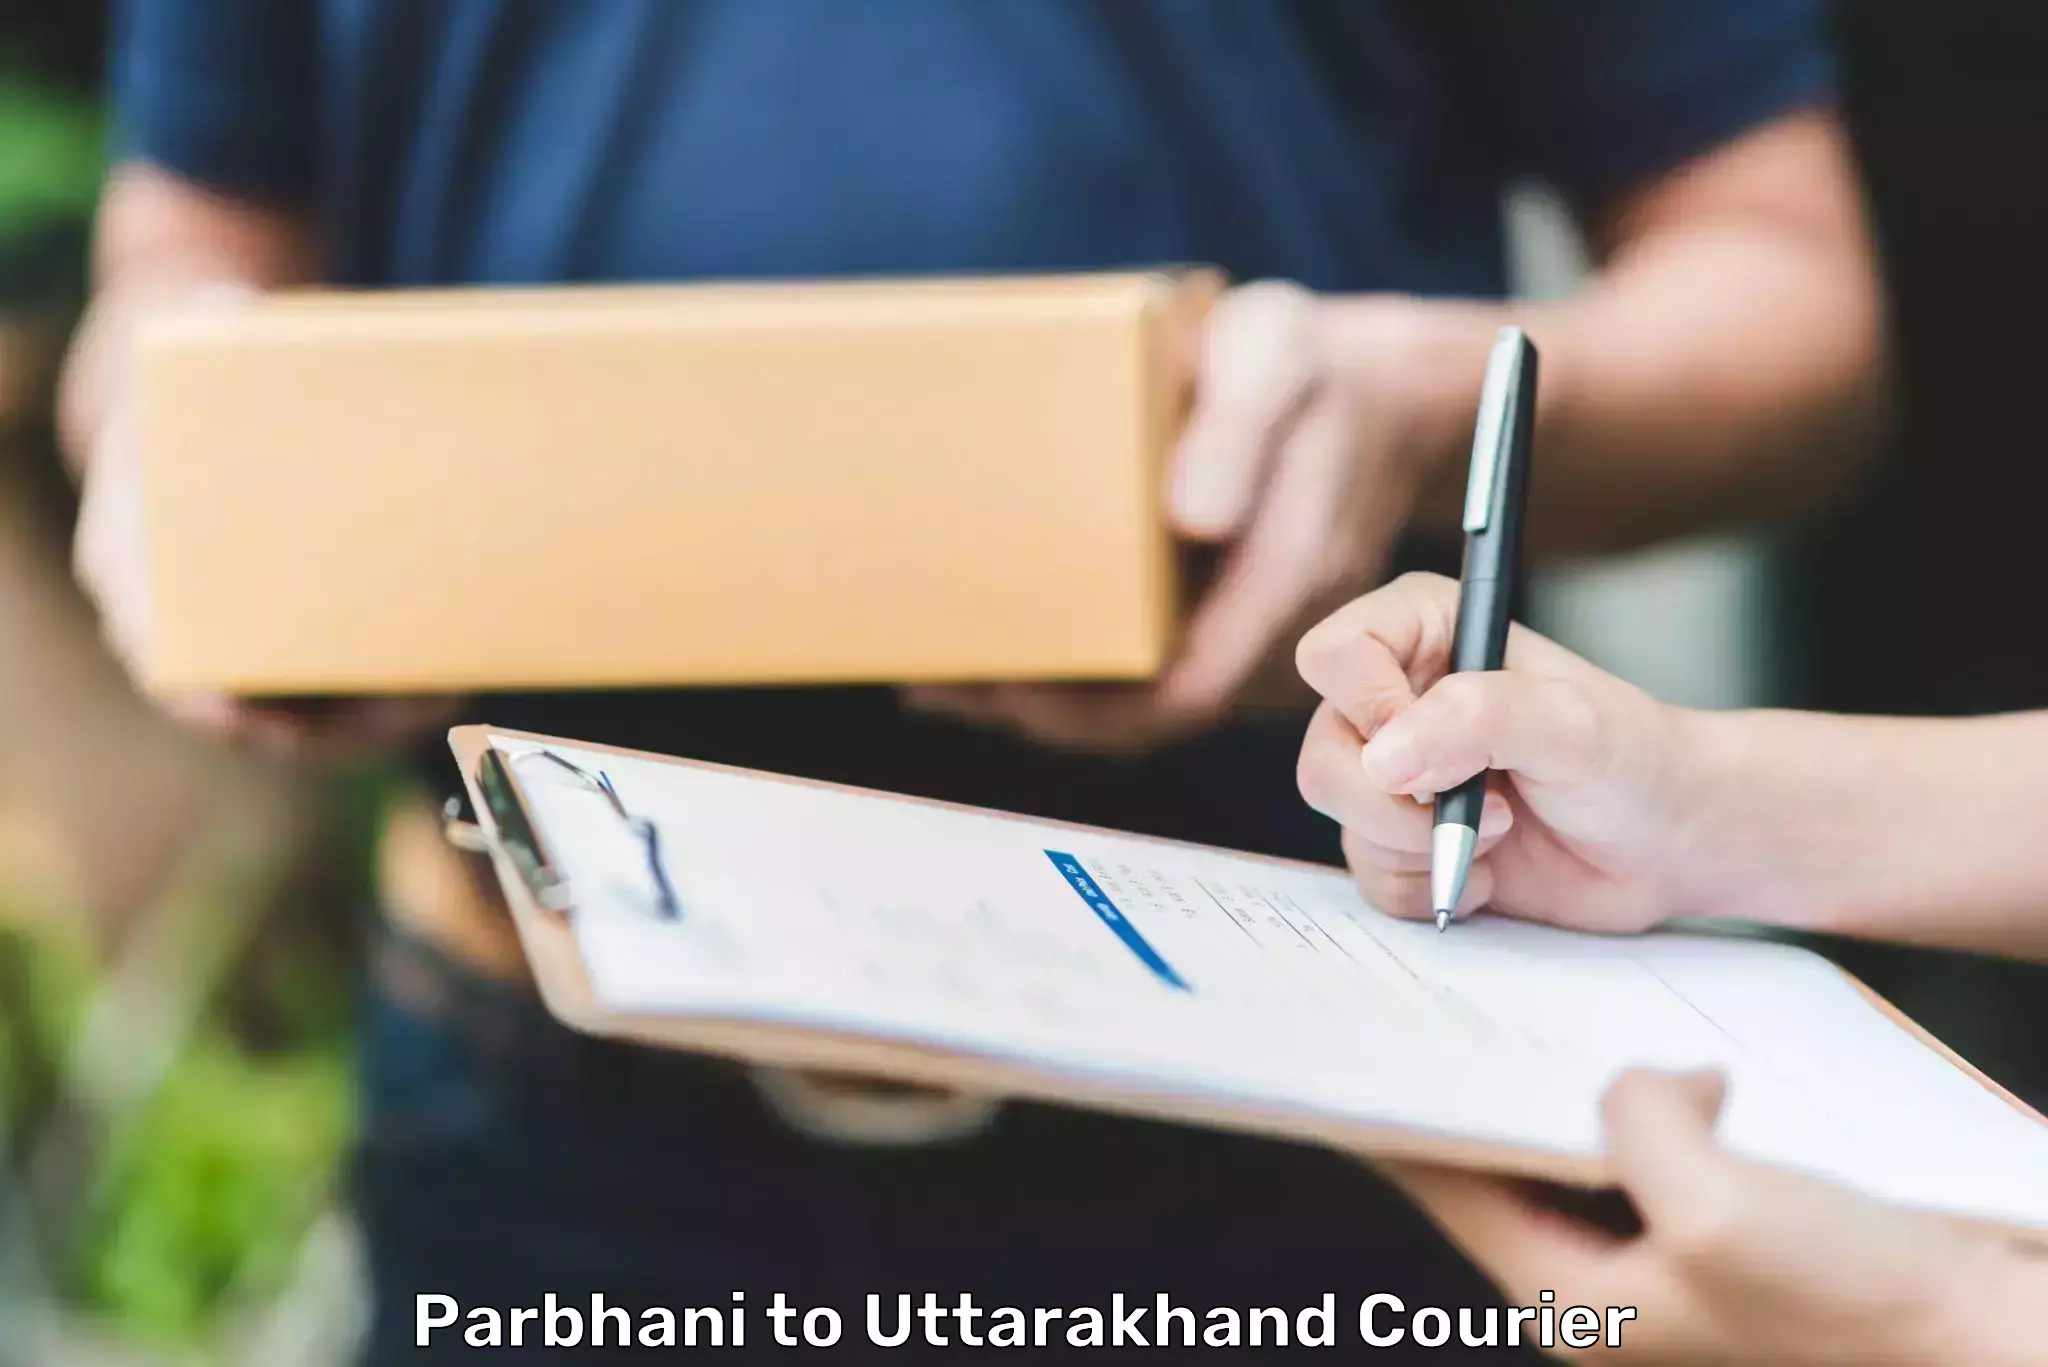 Fast delivery service Parbhani to Uttarakhand